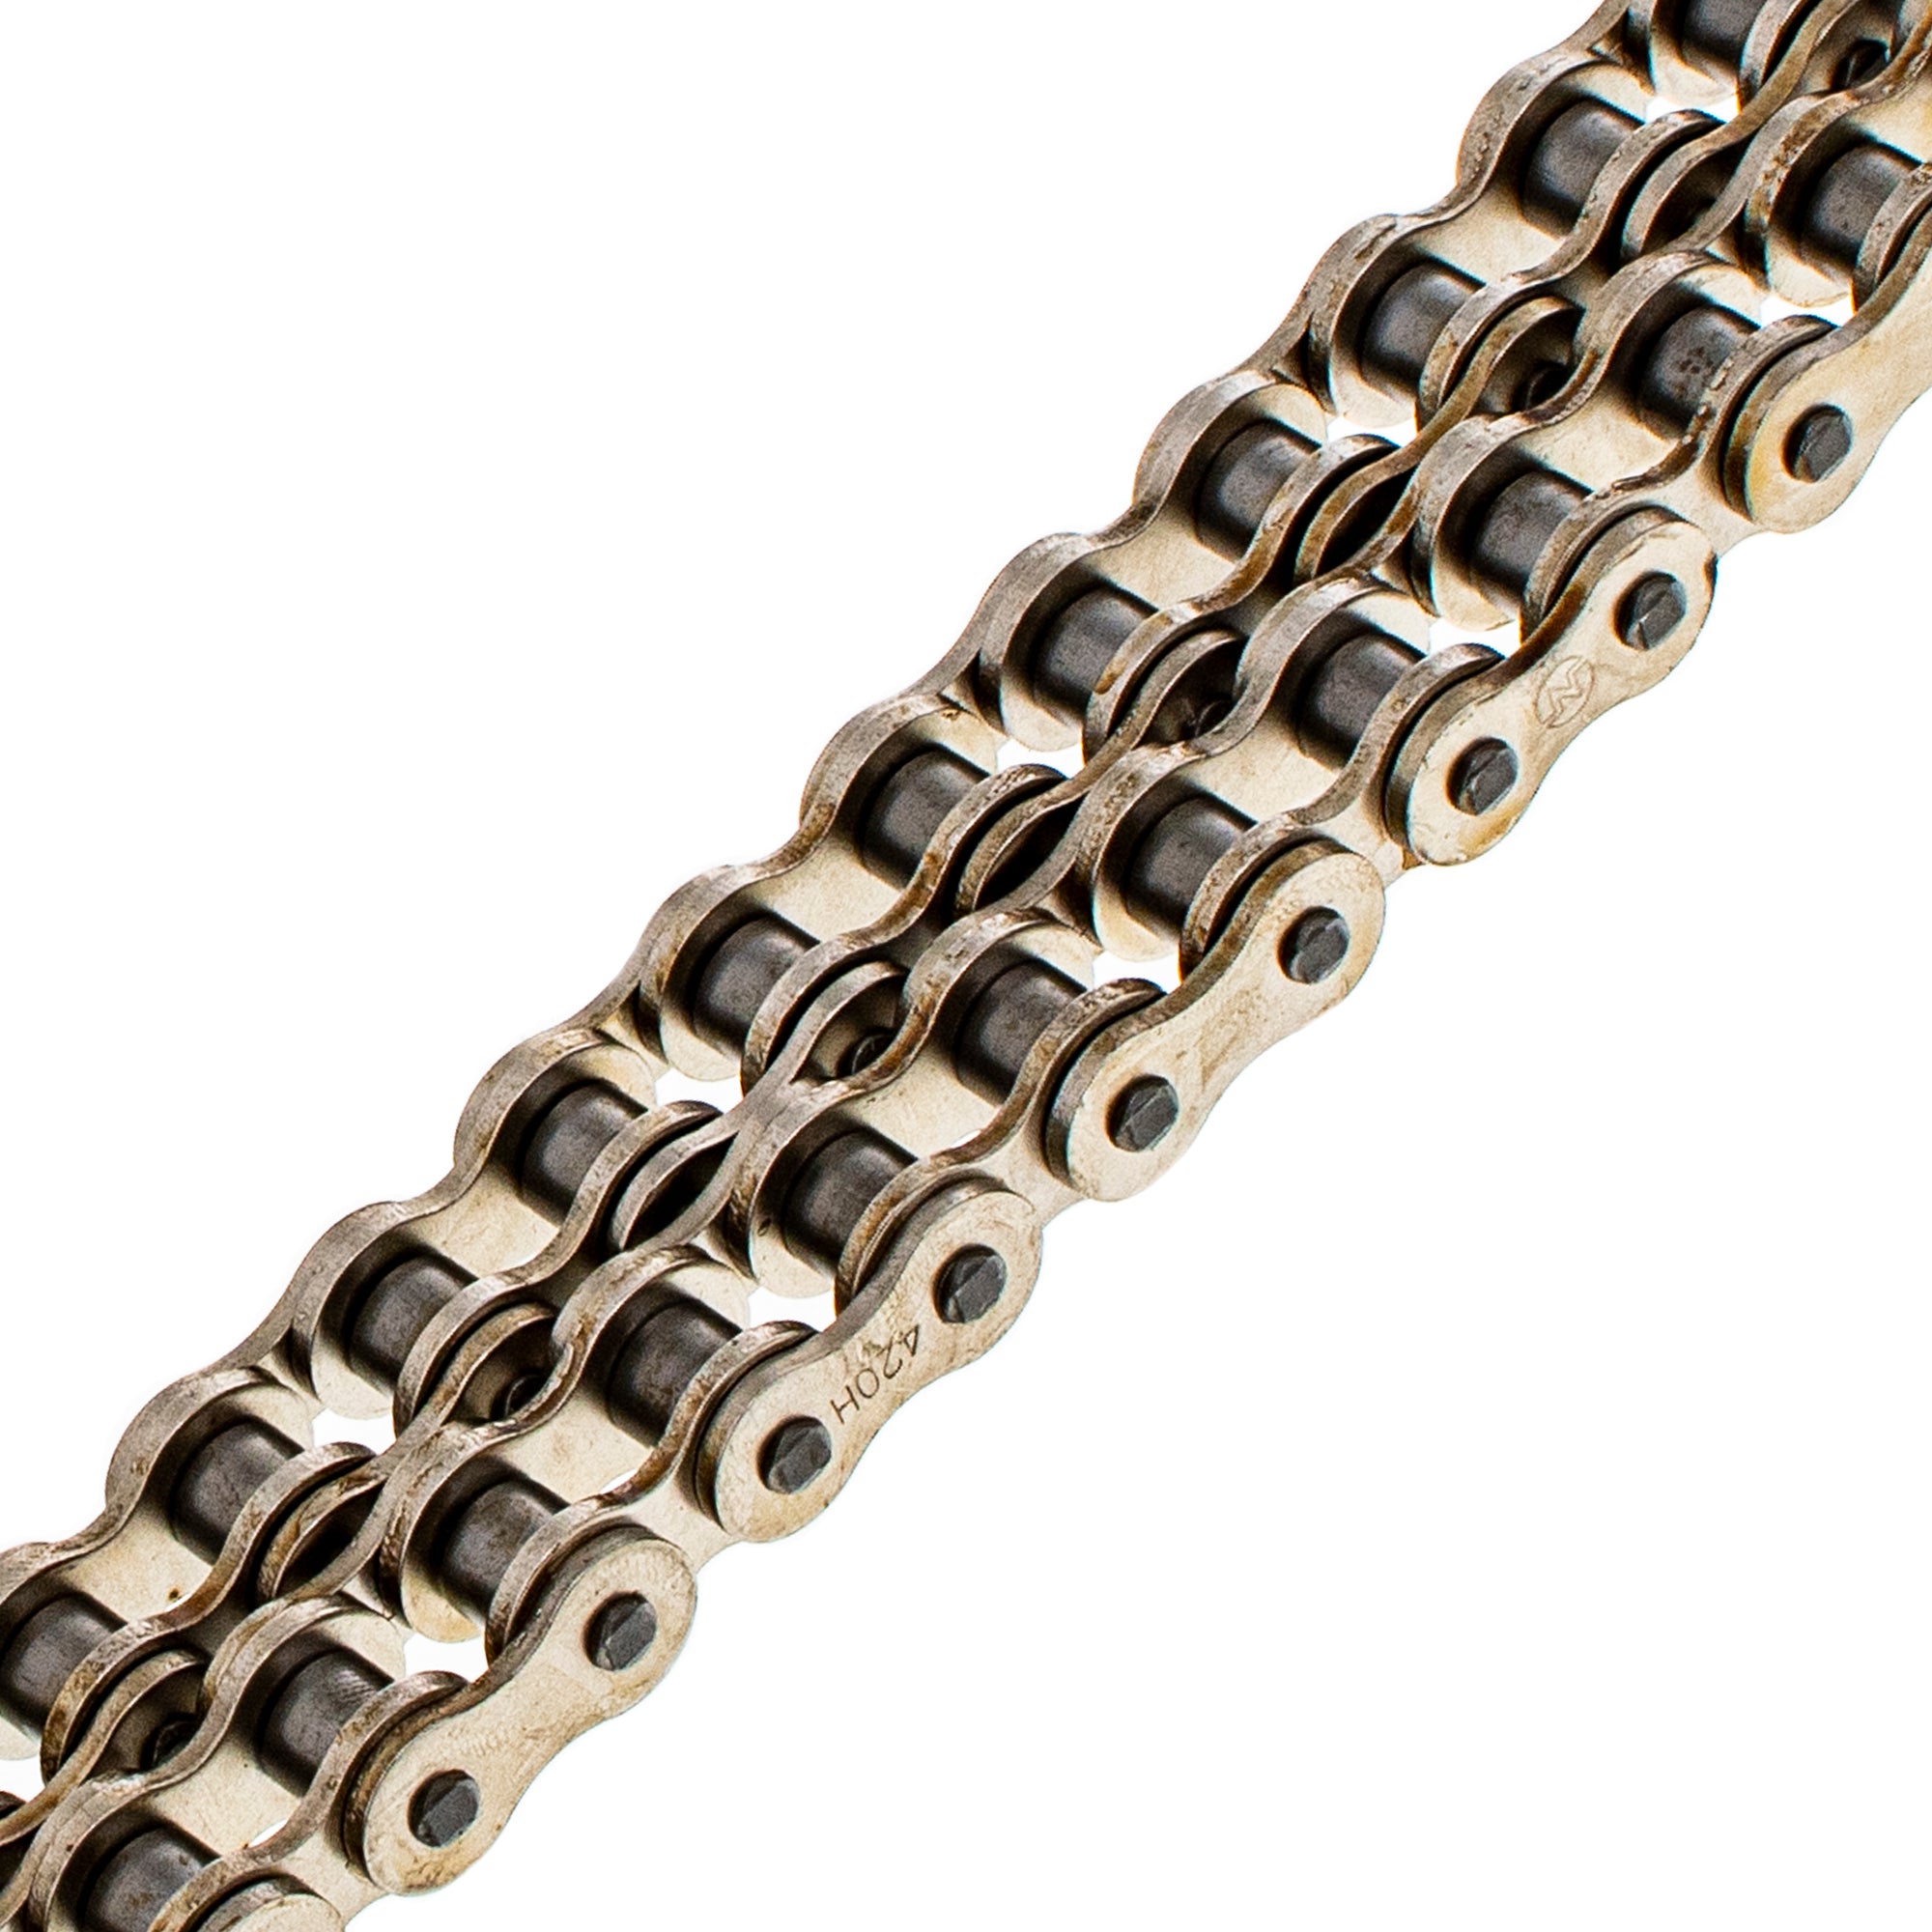 Drive Chain 102 Standard Non O-Ring w/ Master Link for zOTHER KD80 DT100 9Y580-52101-00 NICHE 519-CDC2320H